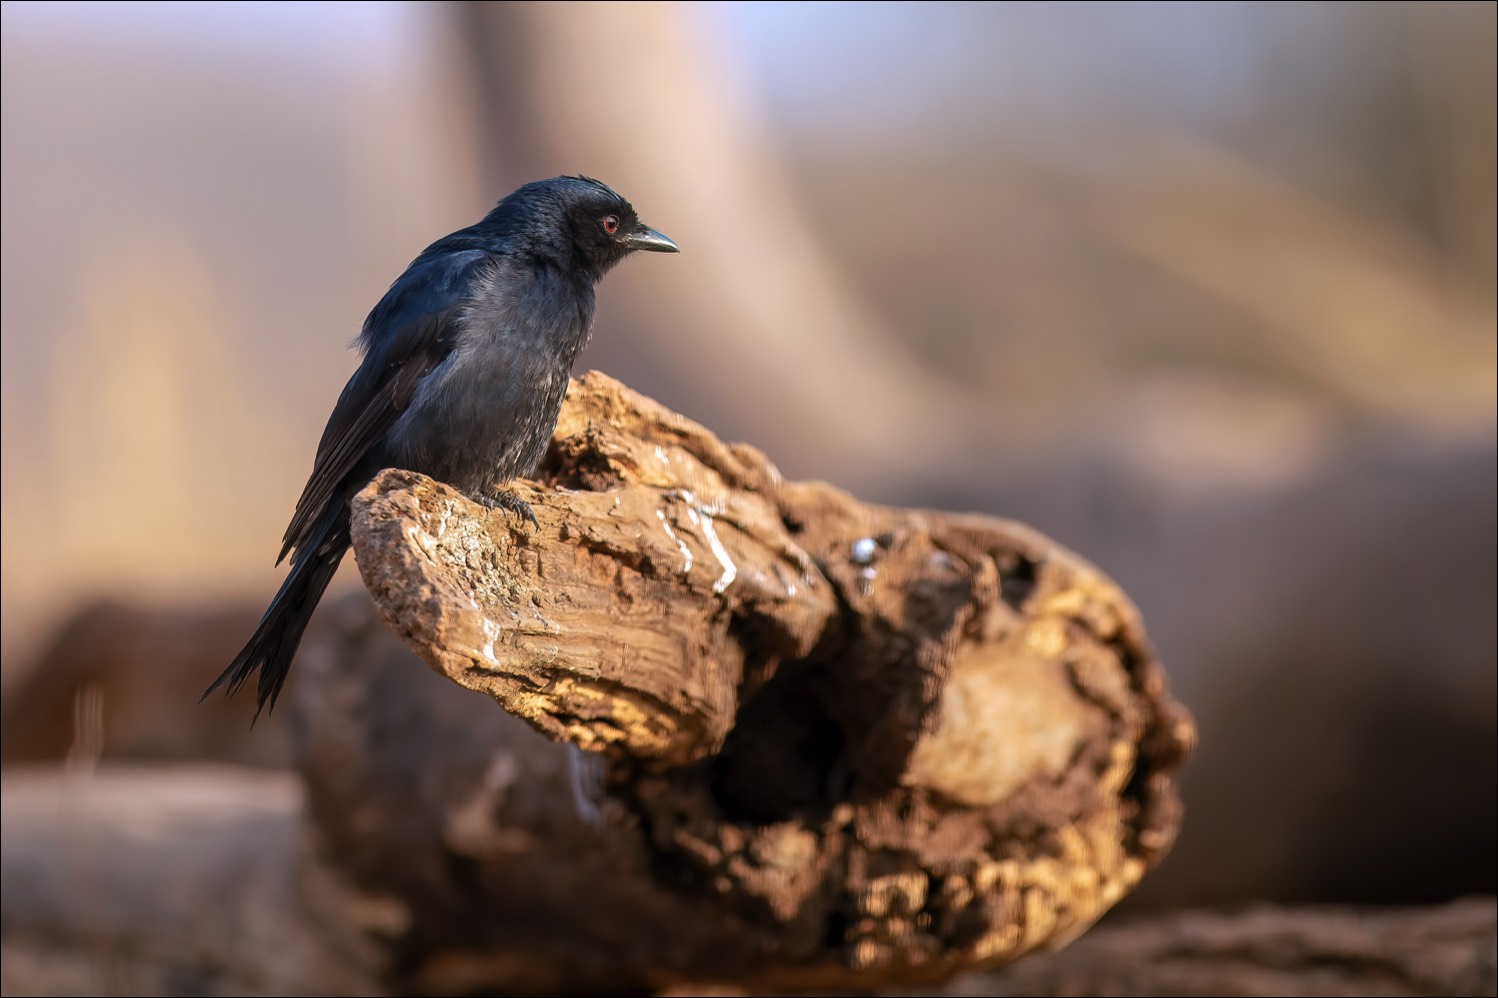 Fork-tailed Drongo (Treurdrongo)